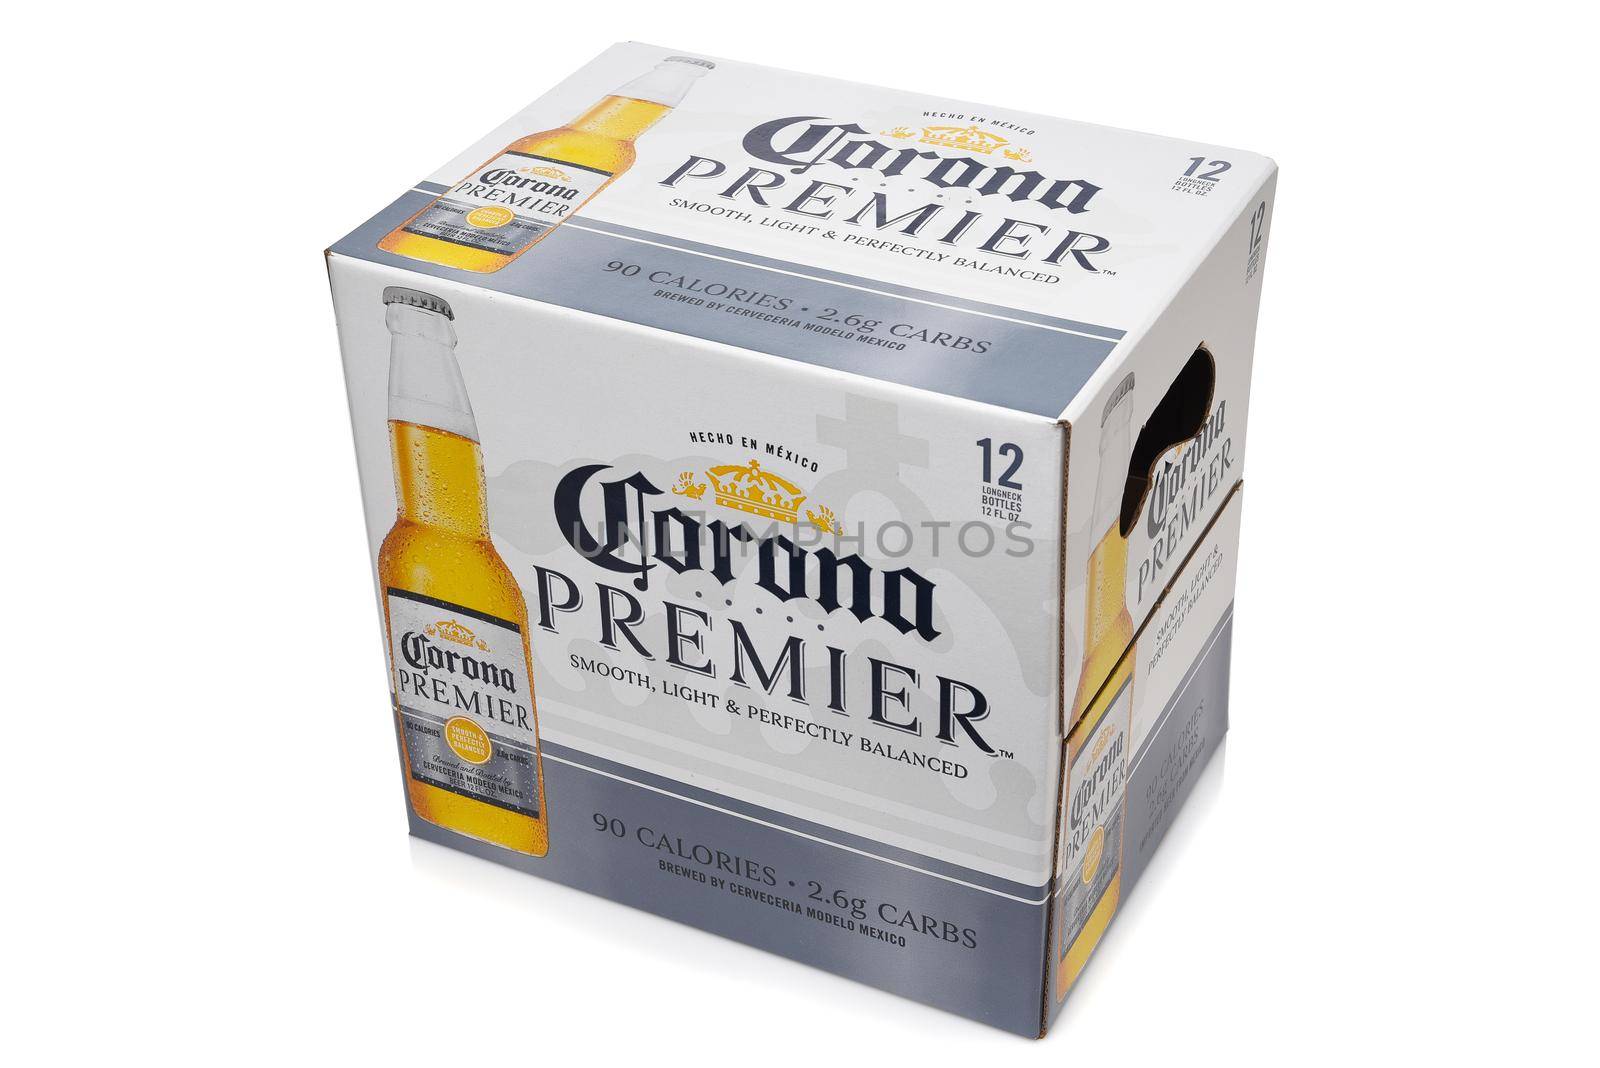 IRVINE, CALIFORNIA - 10 MAR 2020: A 12 pack of Corona Premier bottles, Corona Premier is premium light beer with 2.6 grams of carbs and 90 calories. 